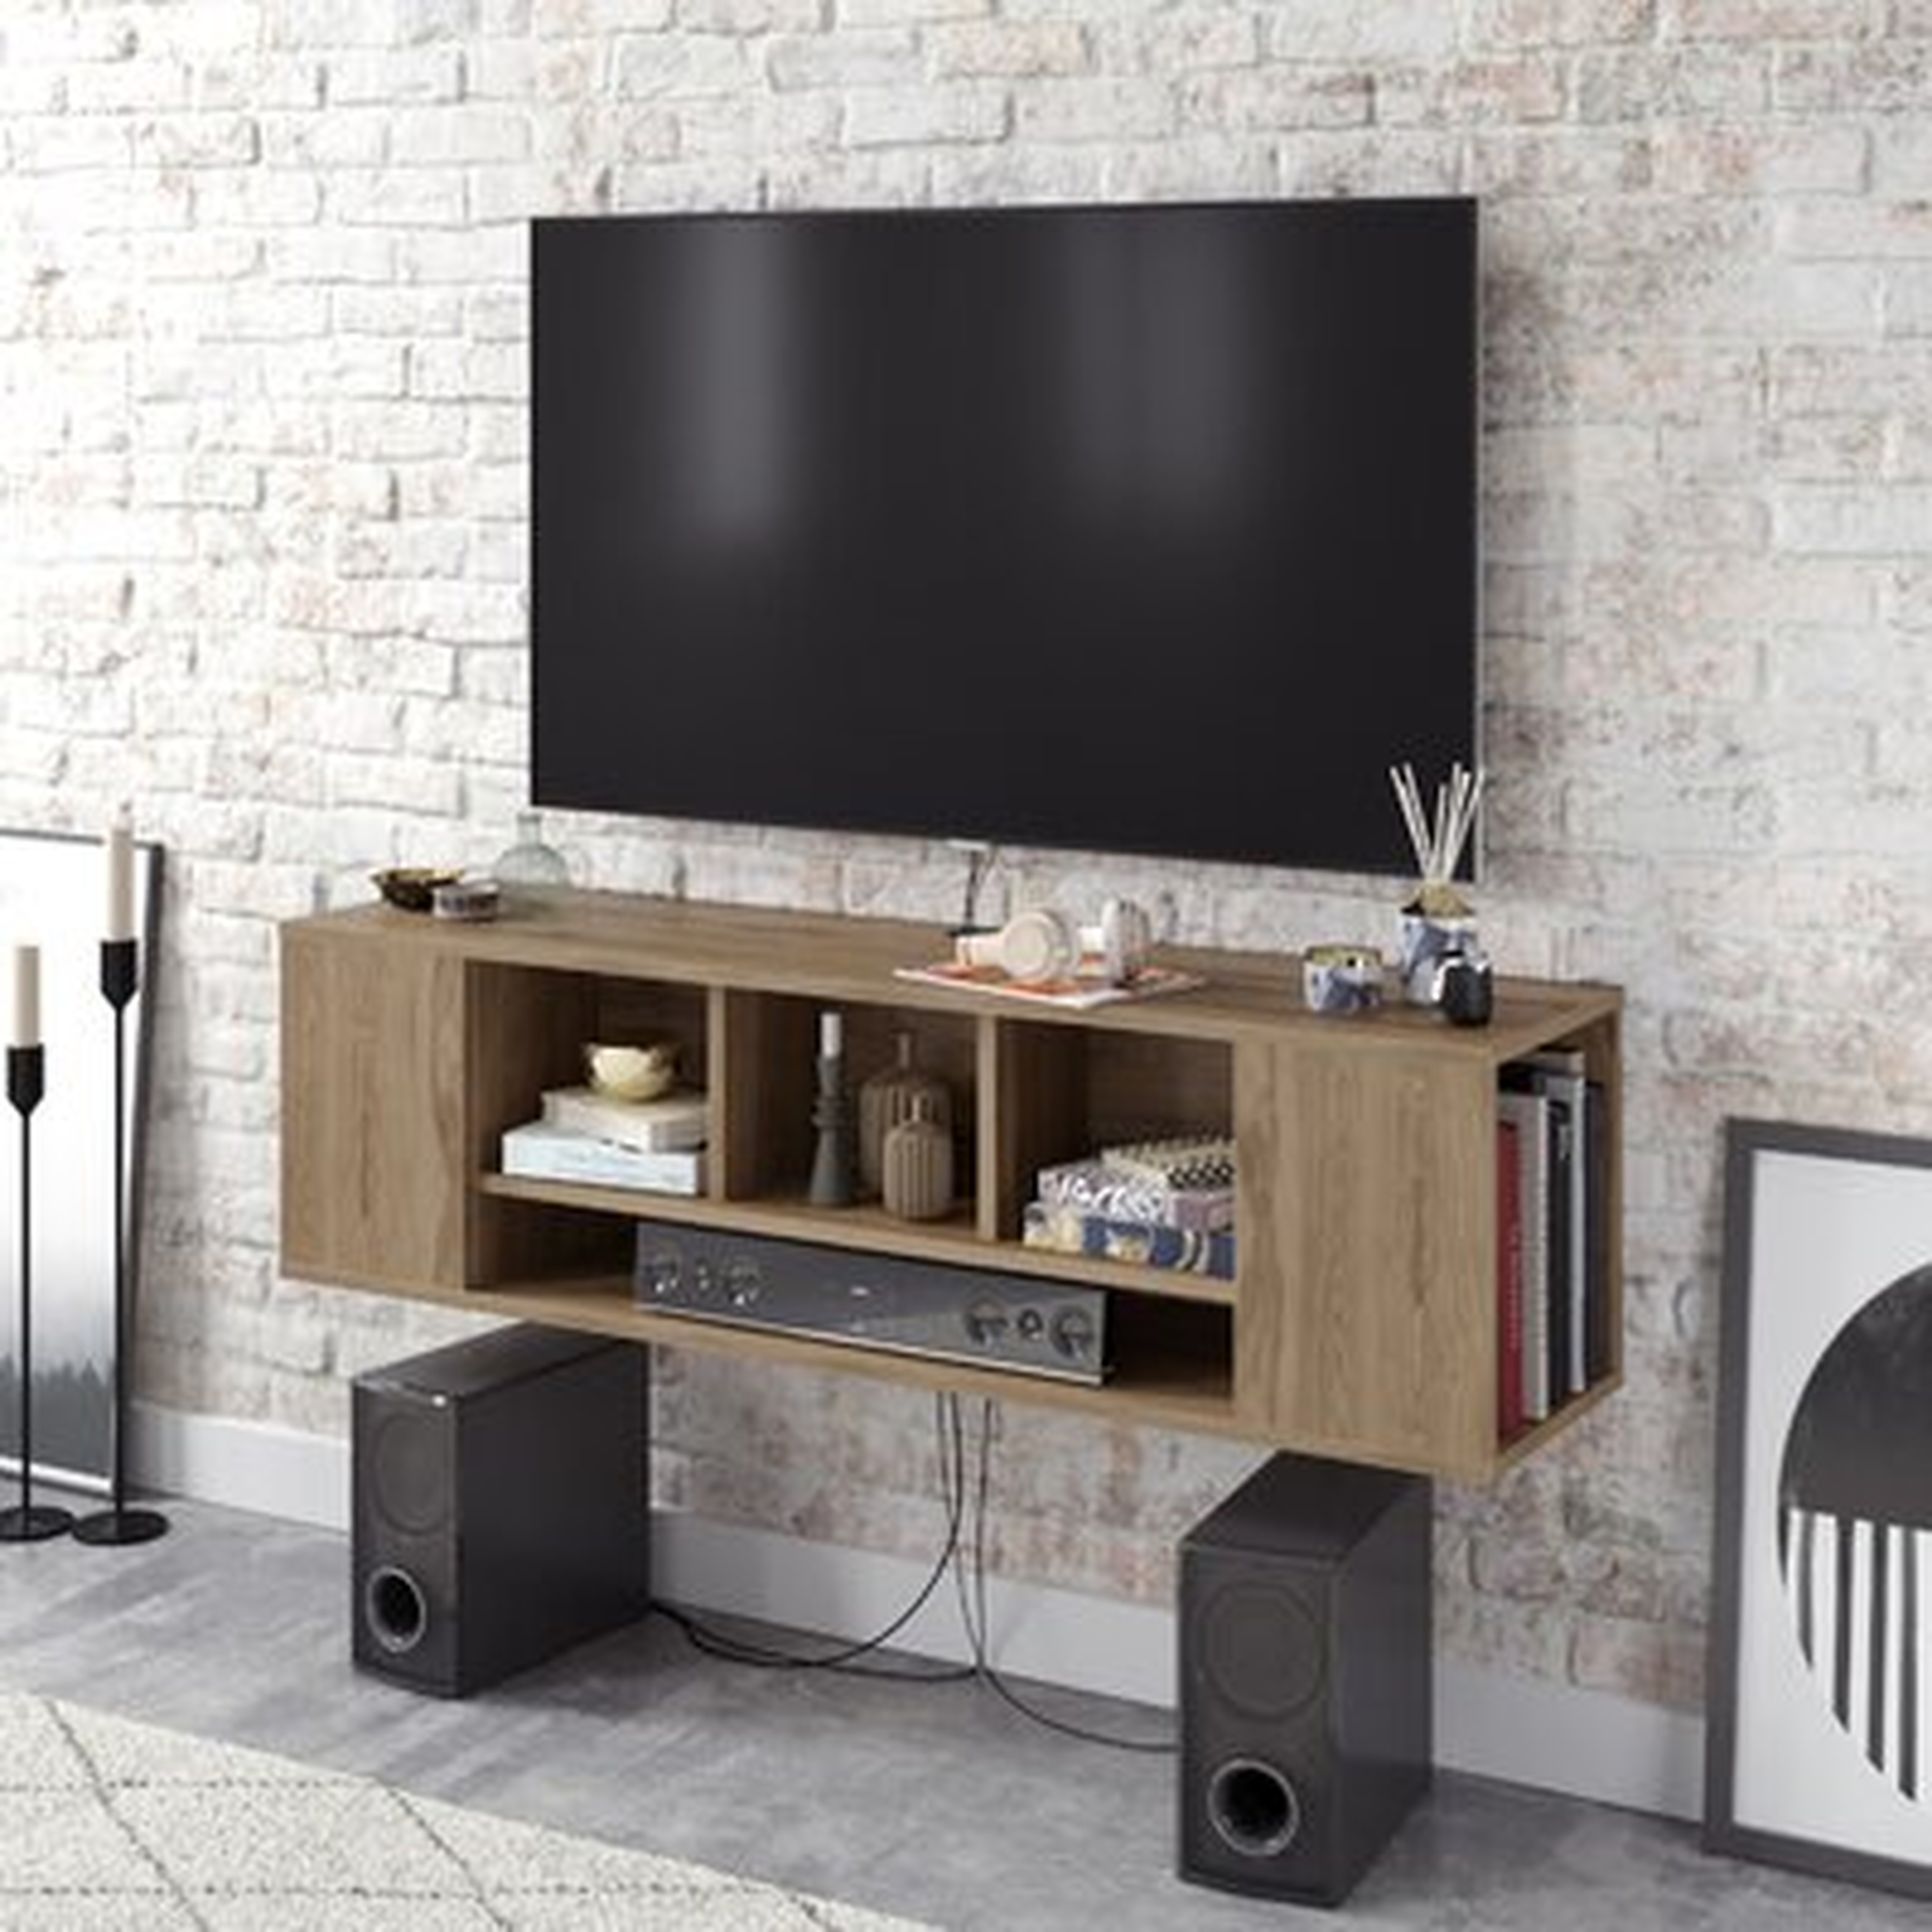 Abbie-James Floating TV Stand for TVs up to 70" - Wayfair